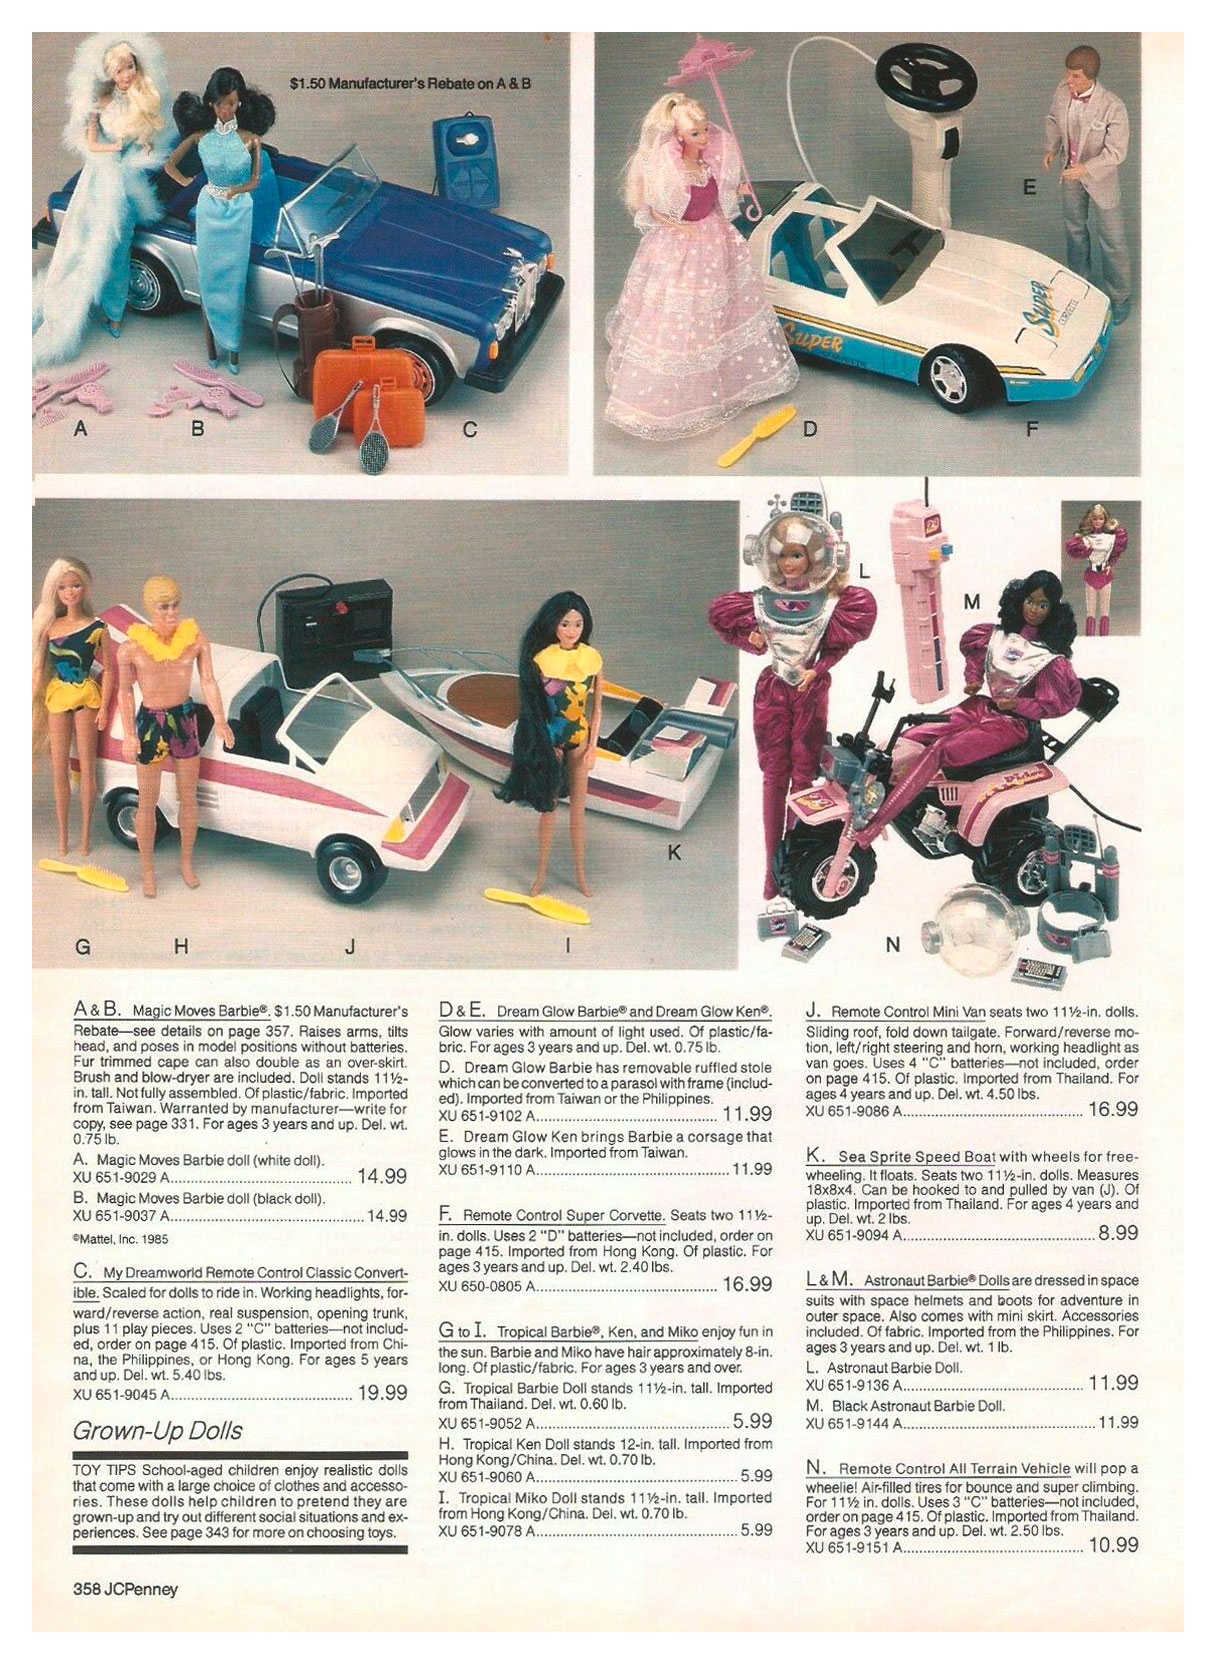 From 1986 JCPenney Christmas catalogue